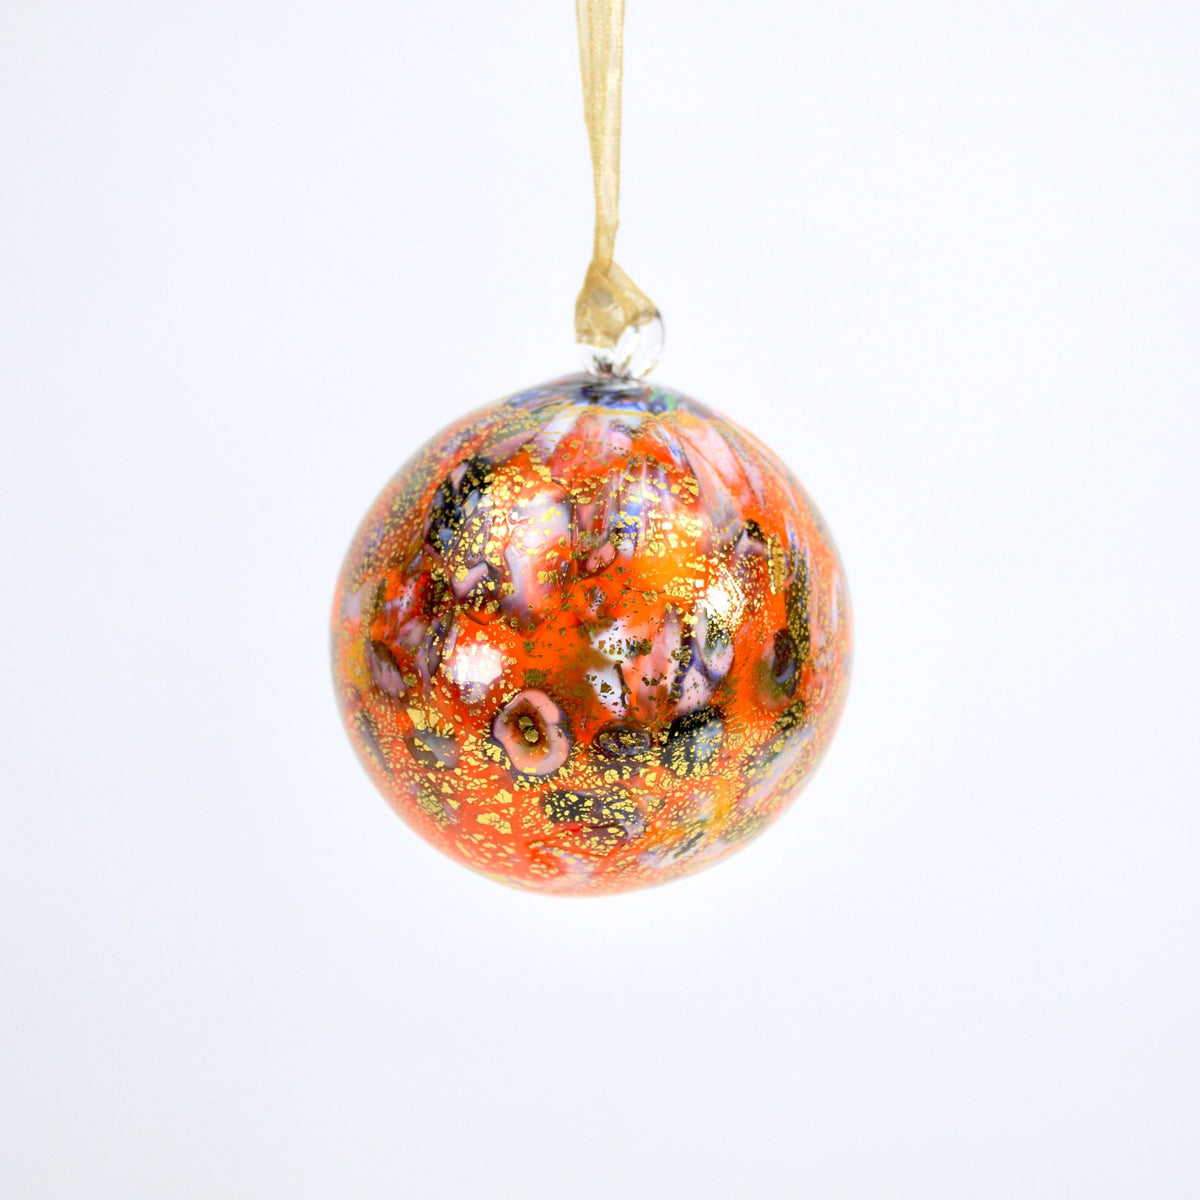 Murano Blown Glass Holiday Ornament with Spotted Macchia Accents, Made in Murano, Italy - My Italian Decor